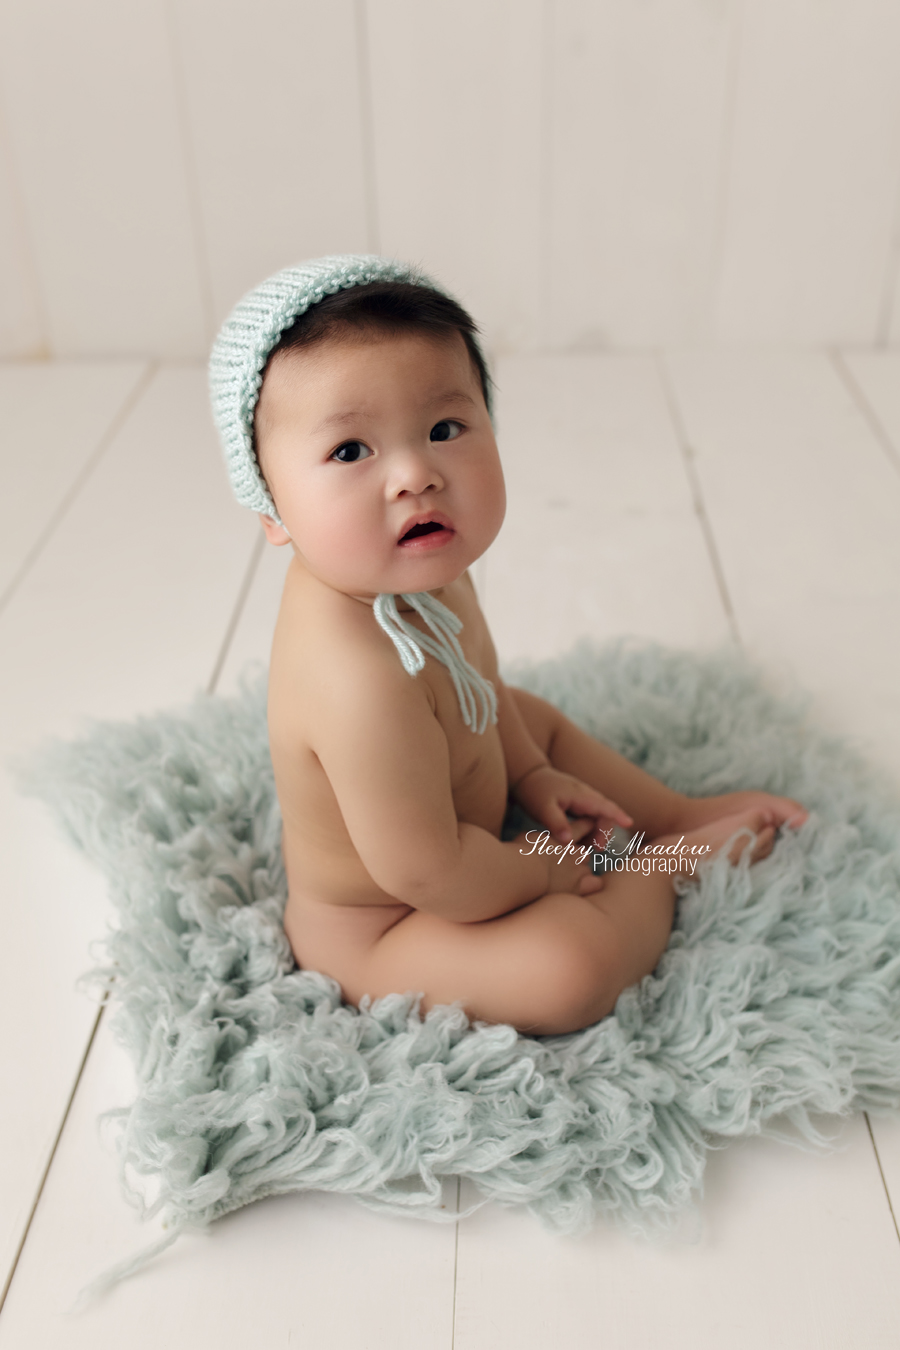 7 month old baby wears a blue bonnet for his photo shoot with Sleepy Meadow Photography.